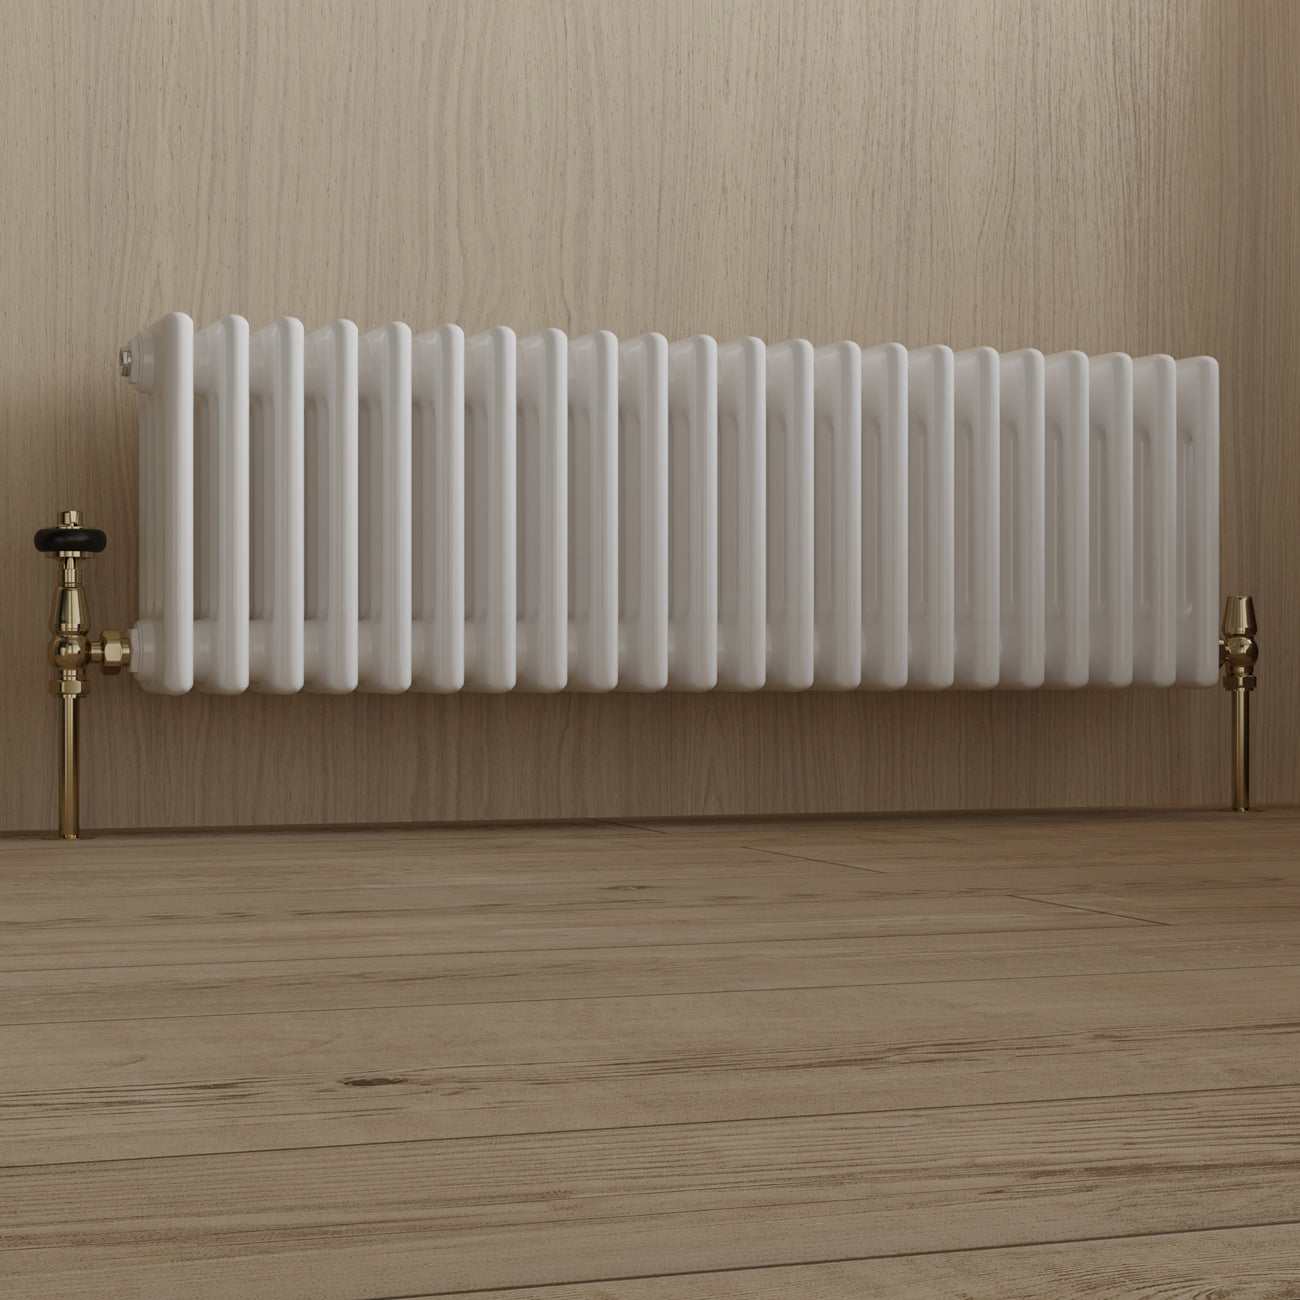 Signature Wooden Head - Polished Brass Thermostatic Radiator Valves Angled